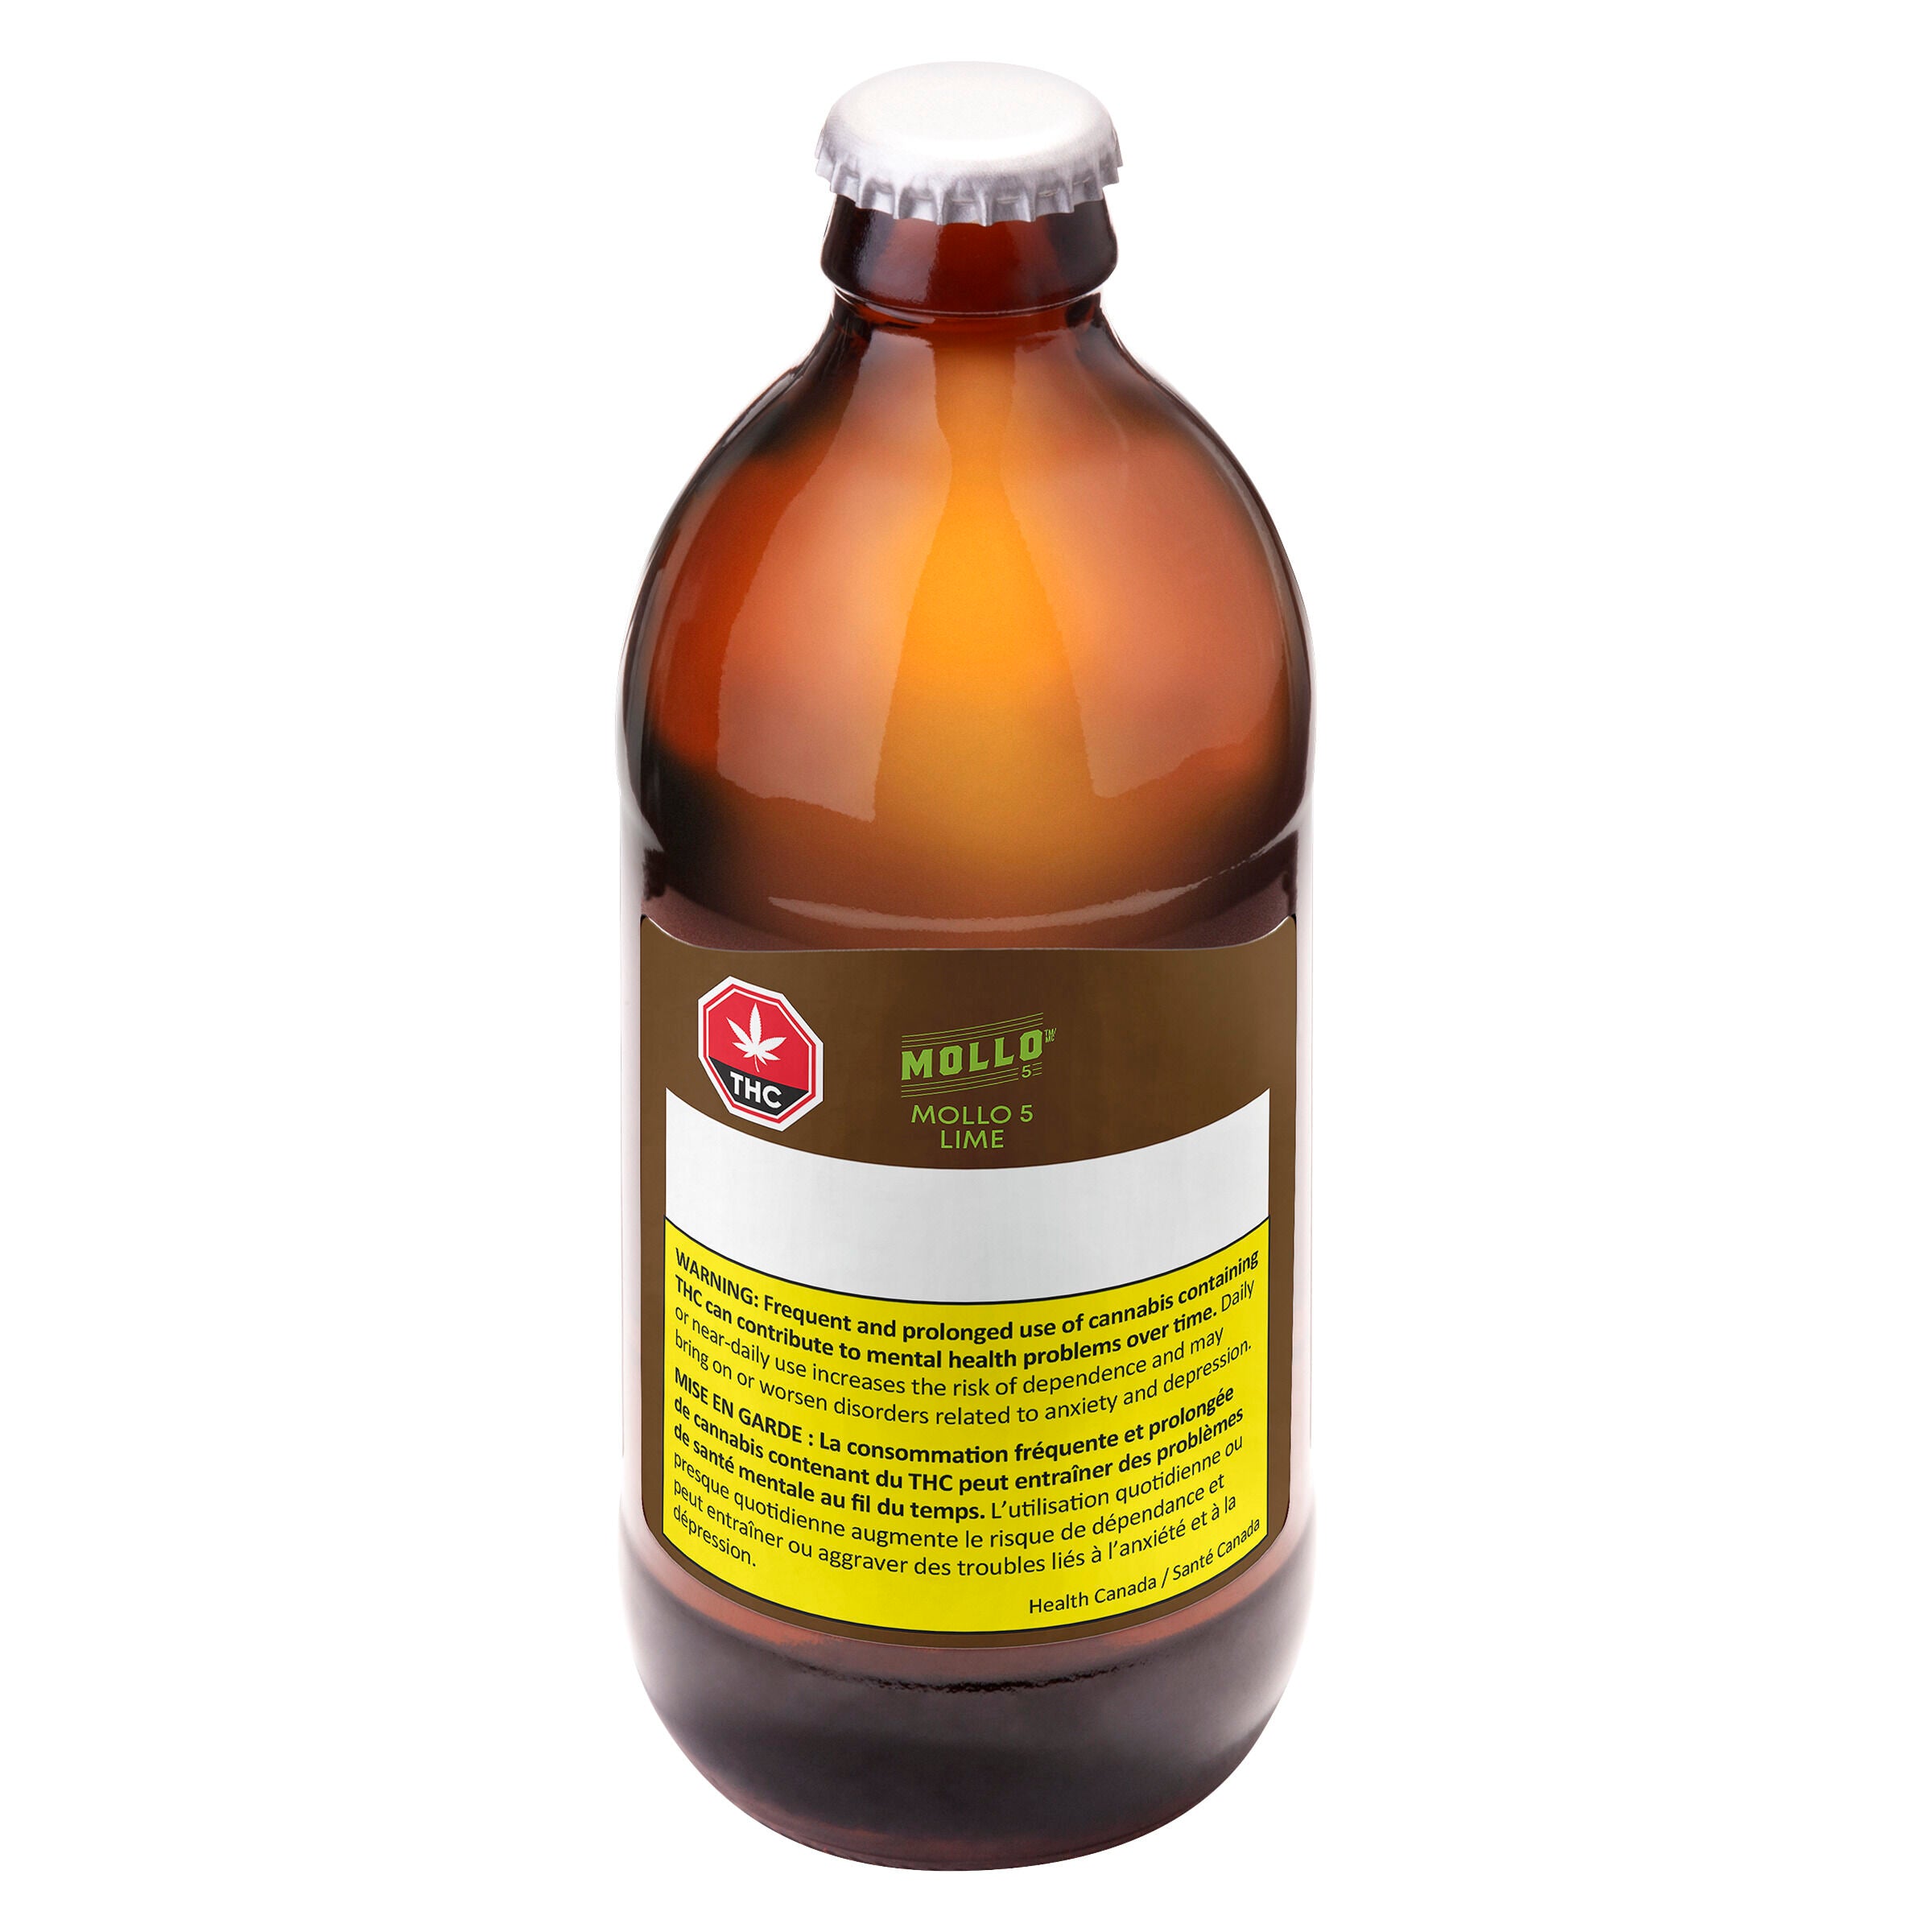 Cannabis Product 5 Lime by Mollo